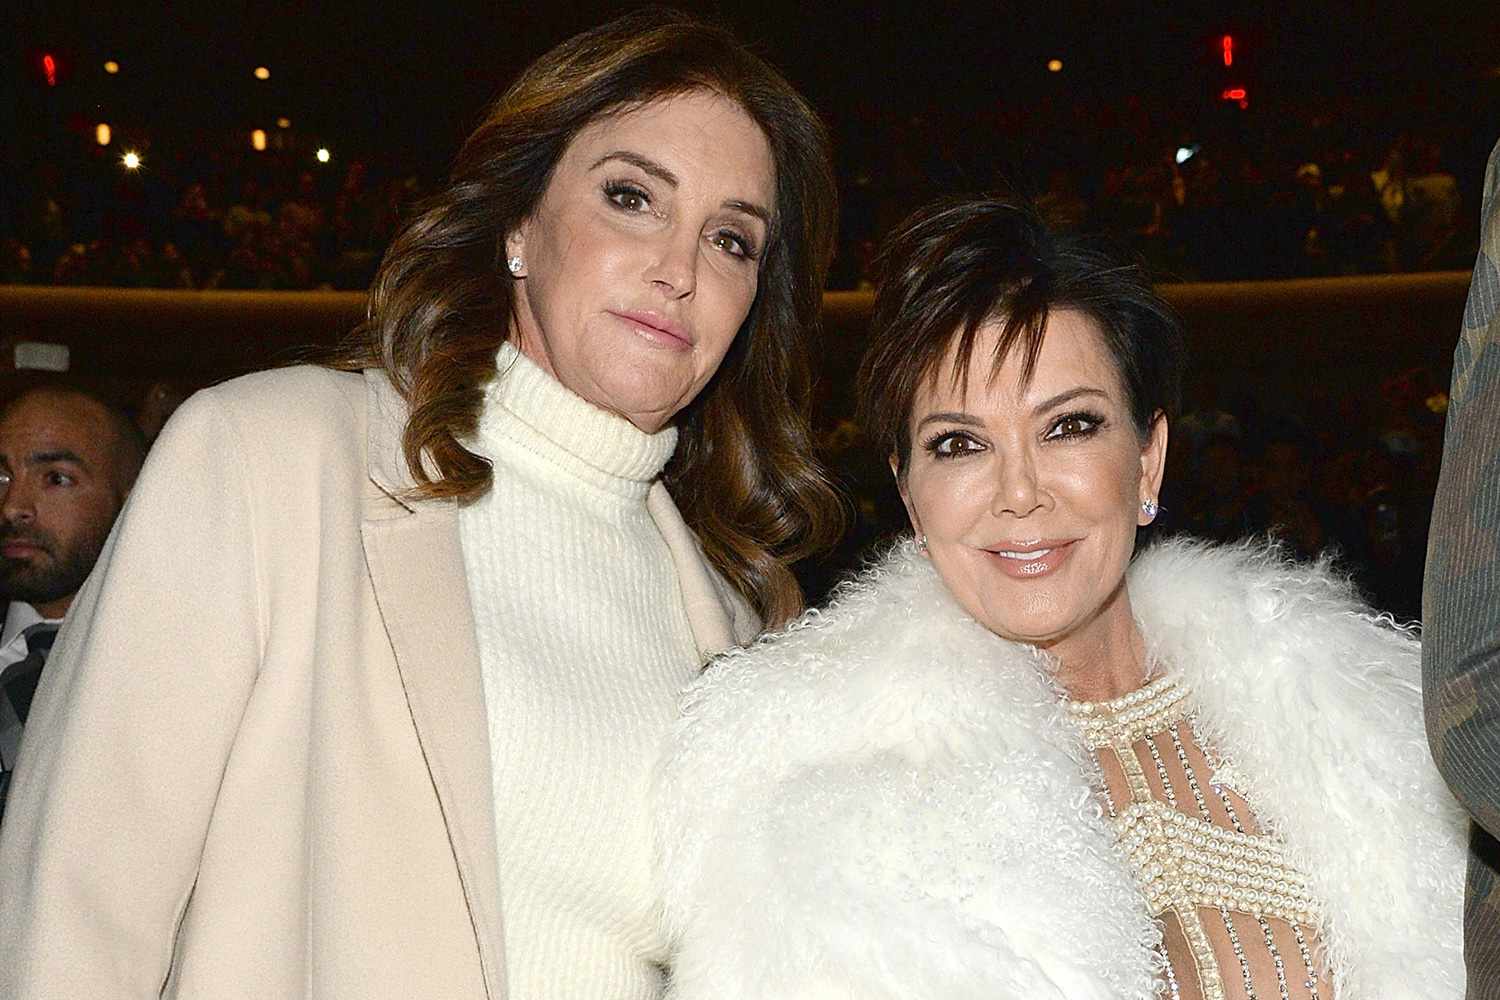 Caitlyn and Kris Jenner